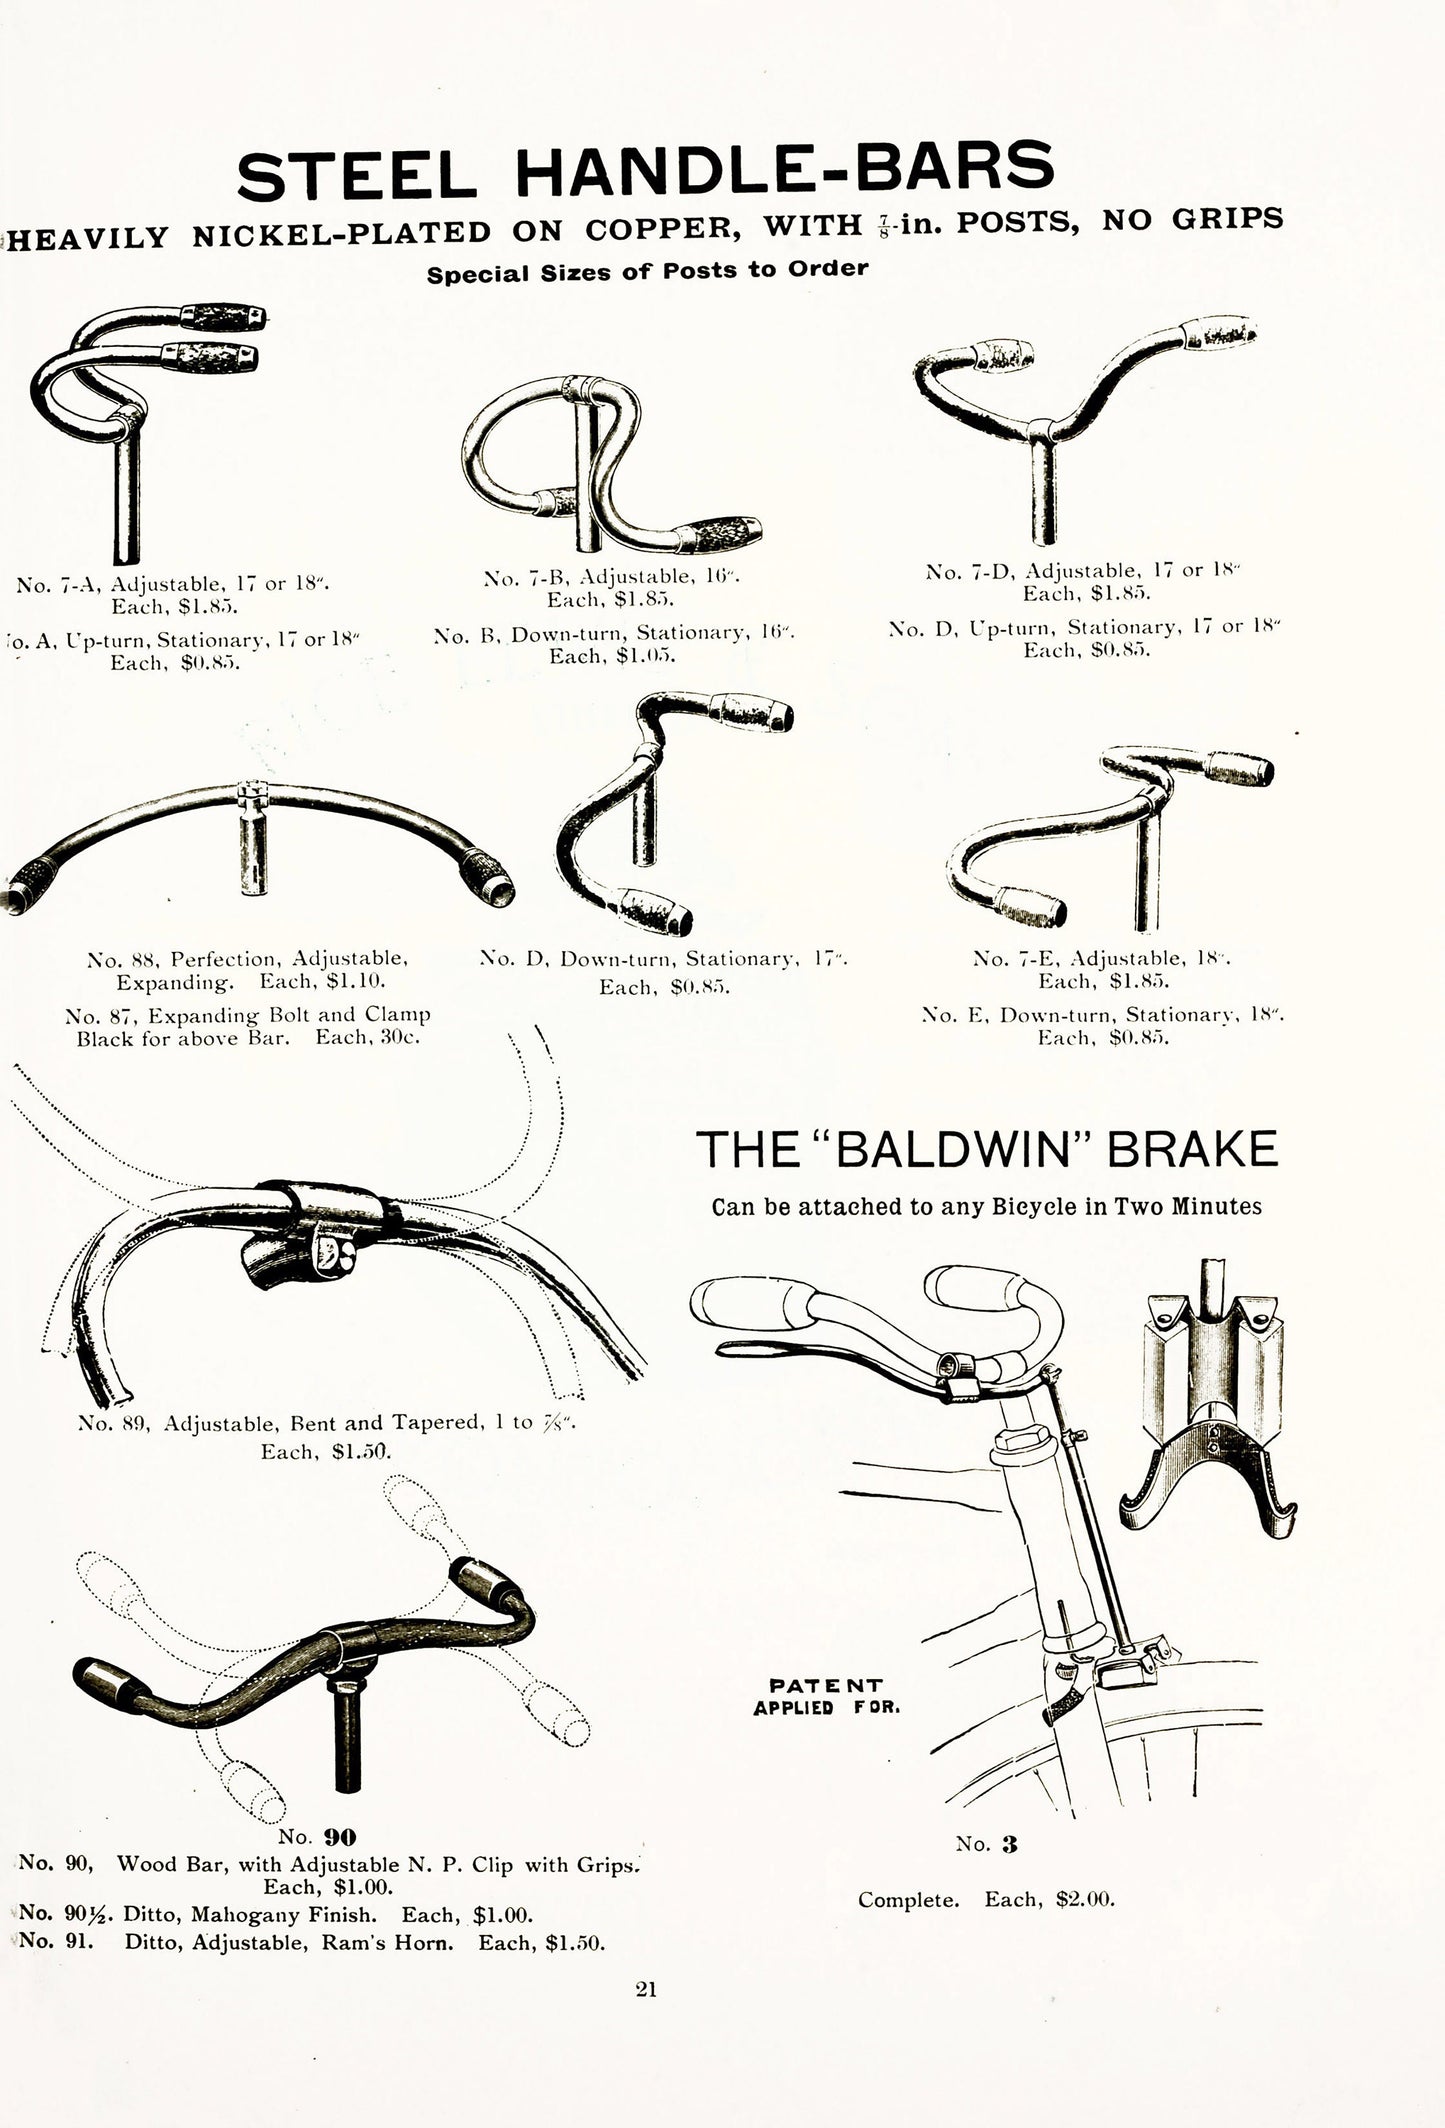 Bicycle Accessories Catalog [60 Images]